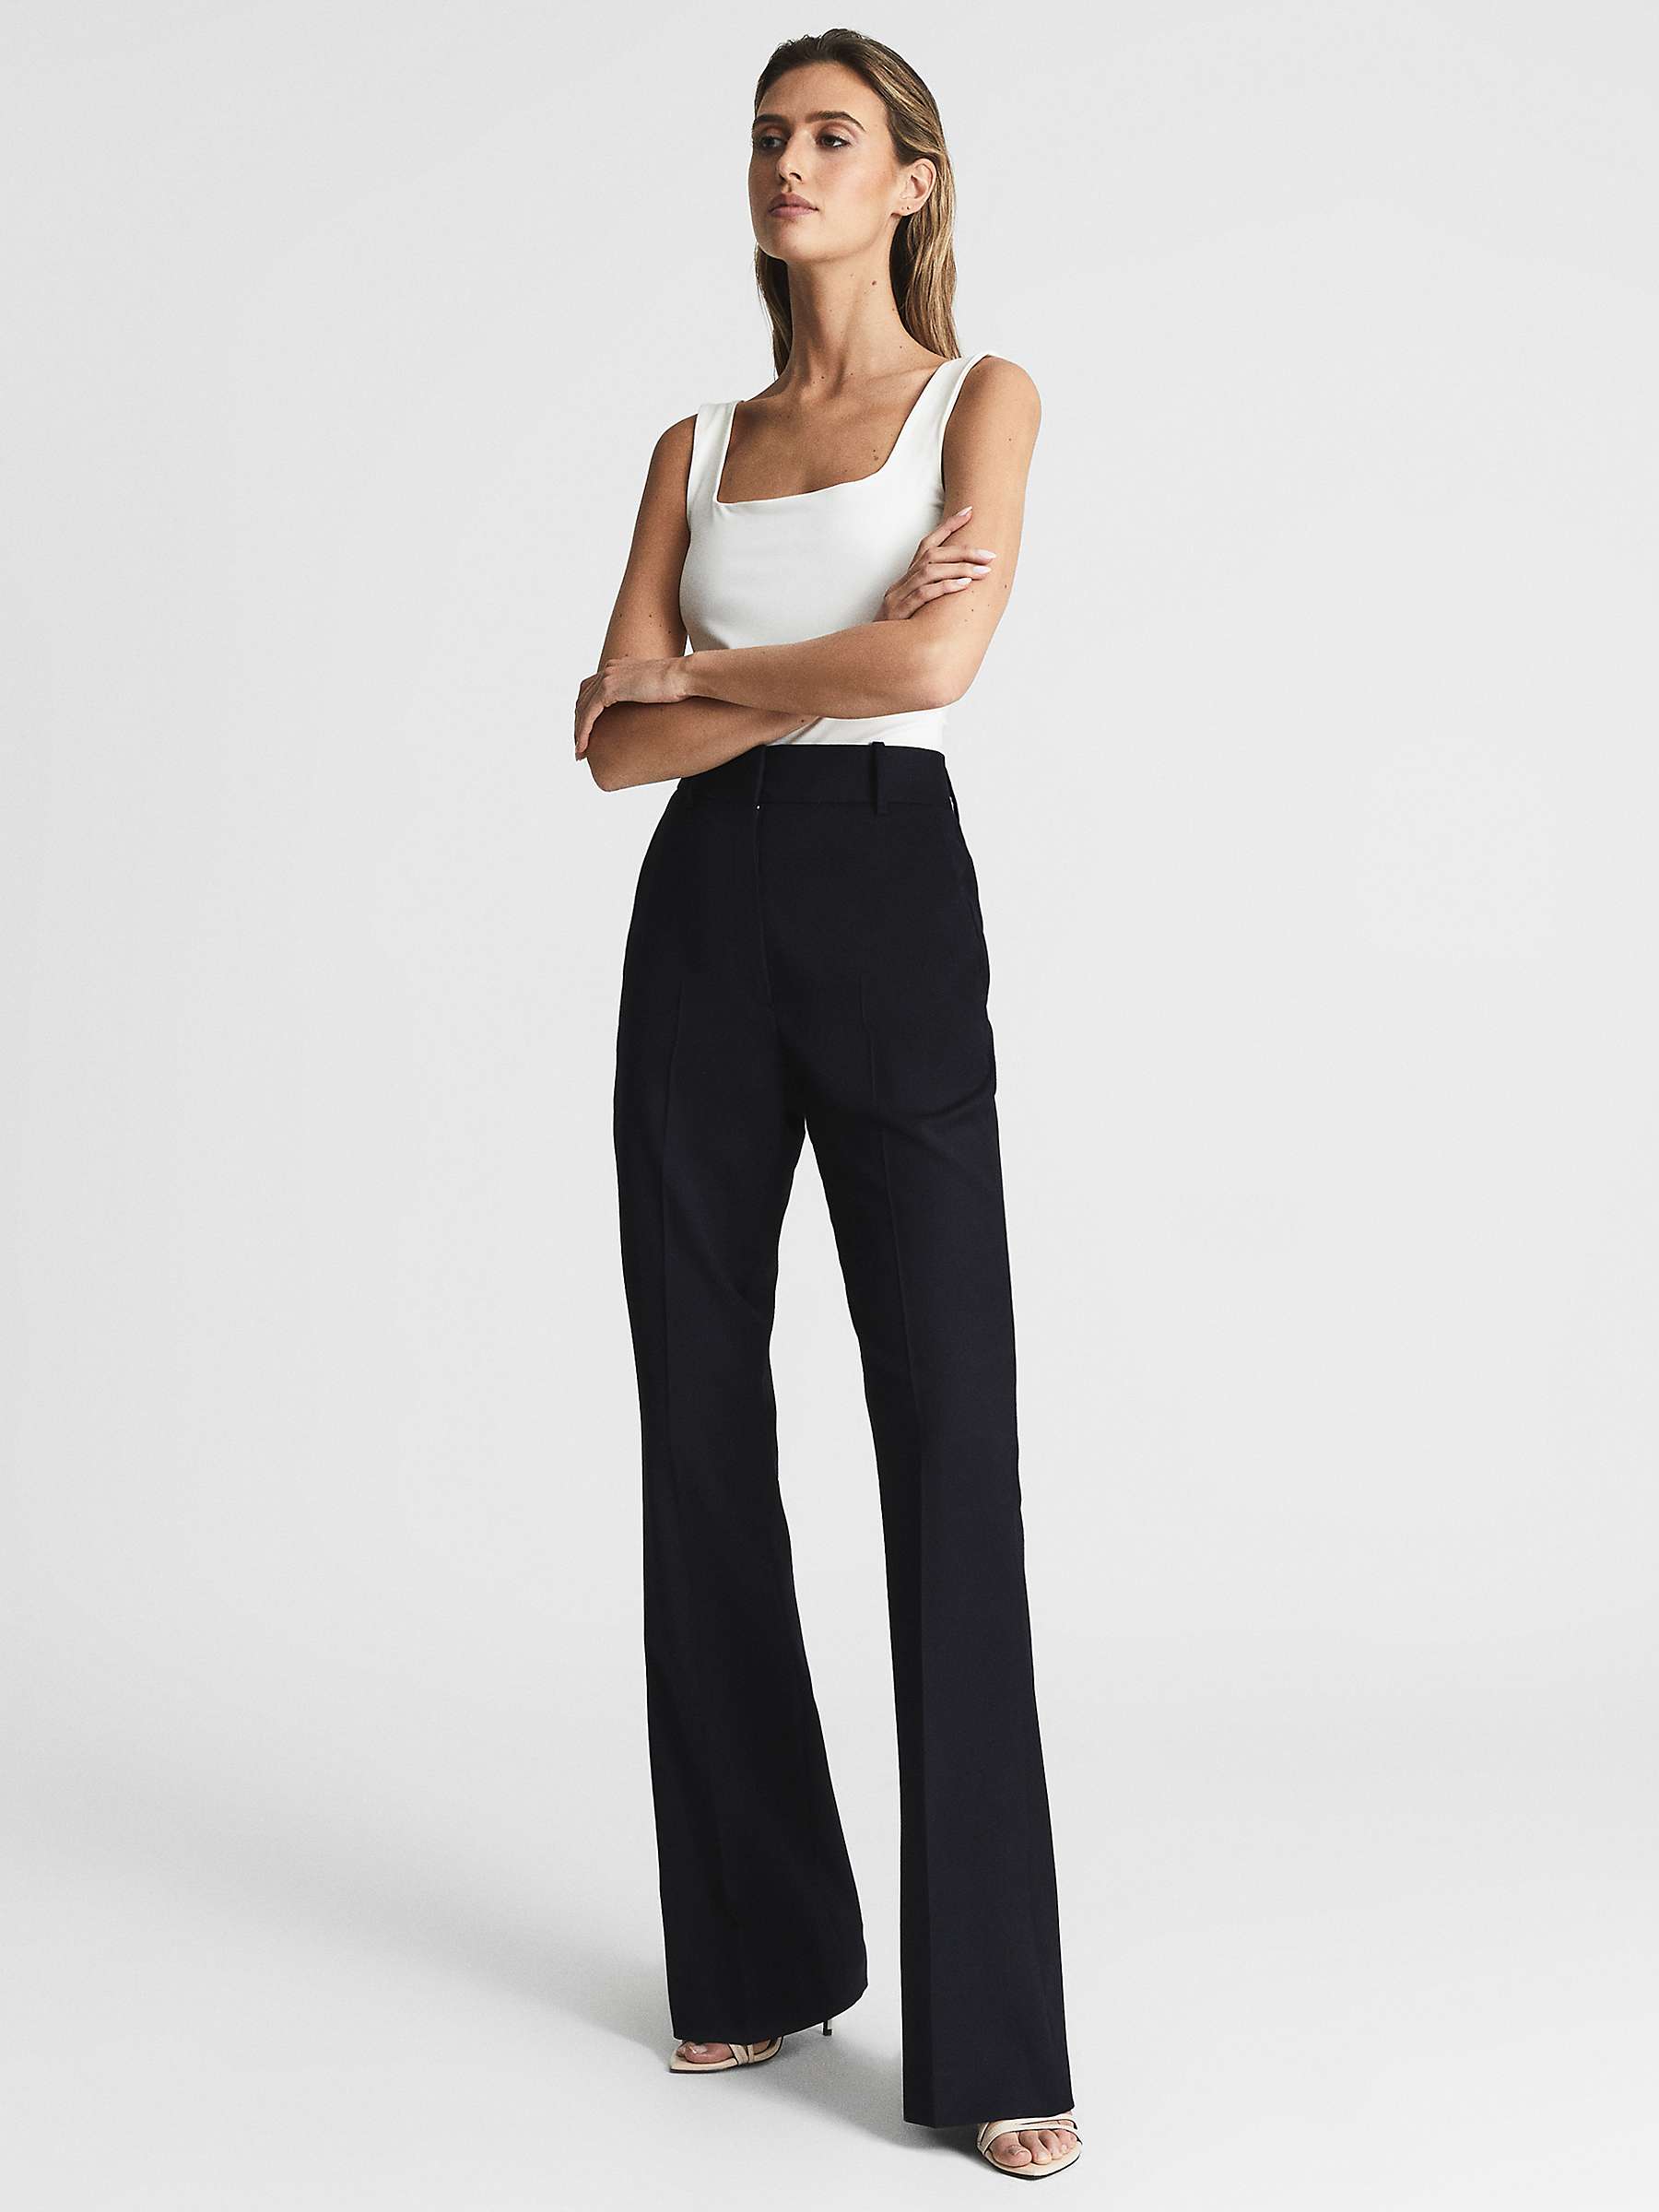 Buy Reiss Haisley Tailored Flare Trousers Online at johnlewis.com